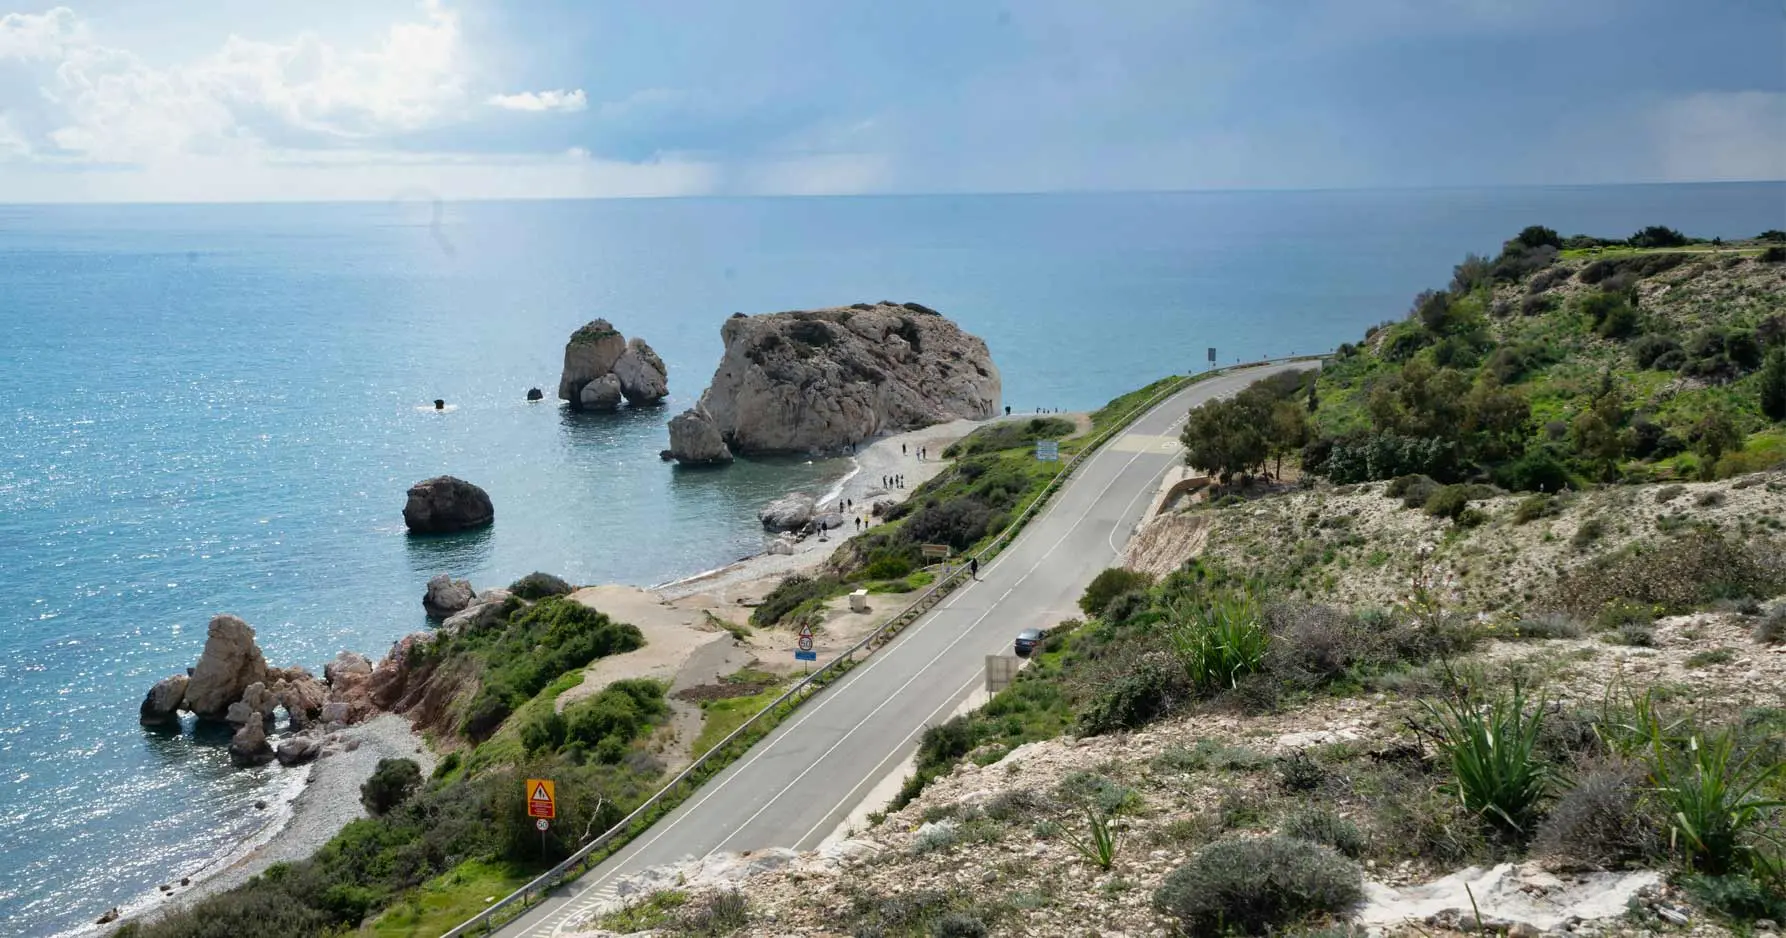 Expansive view of the sea, winding road, and rocks in Cyprus